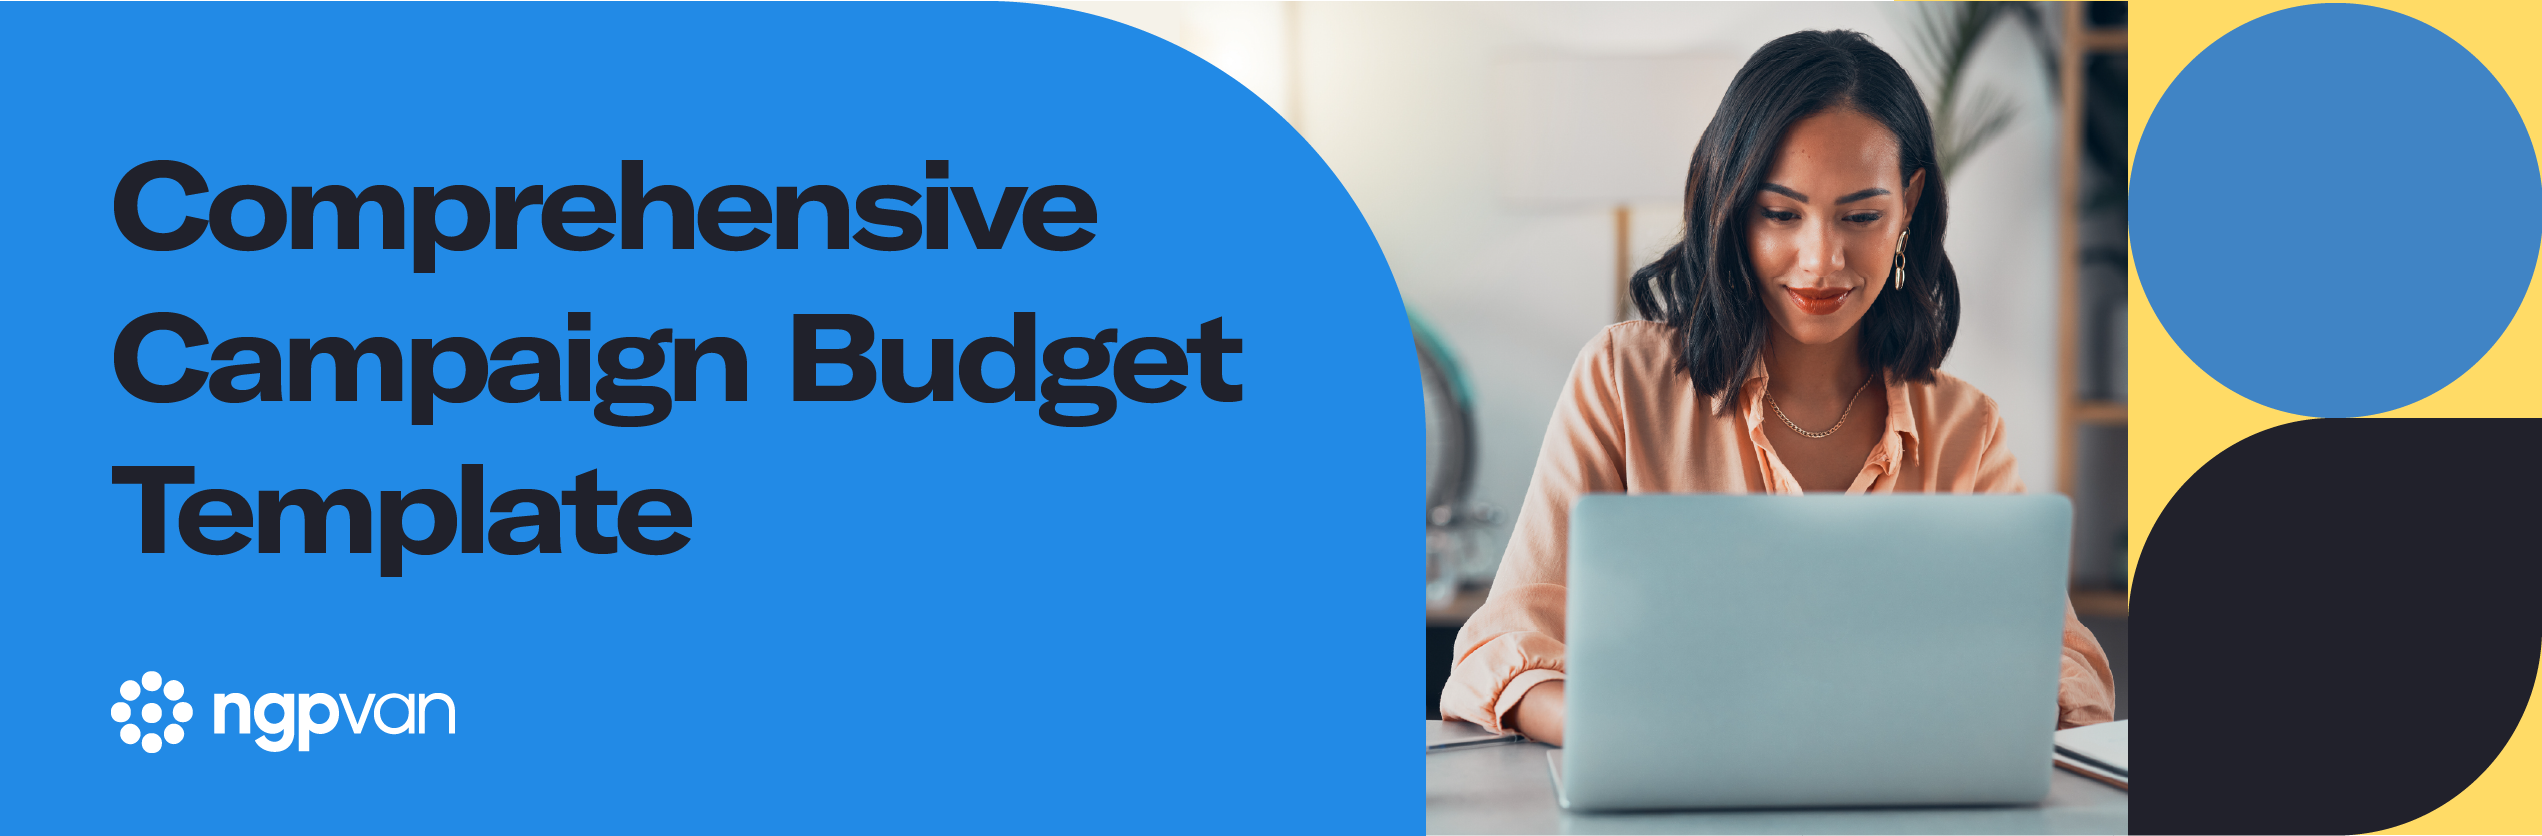 Download the Comprehensive Campaign Budget Template